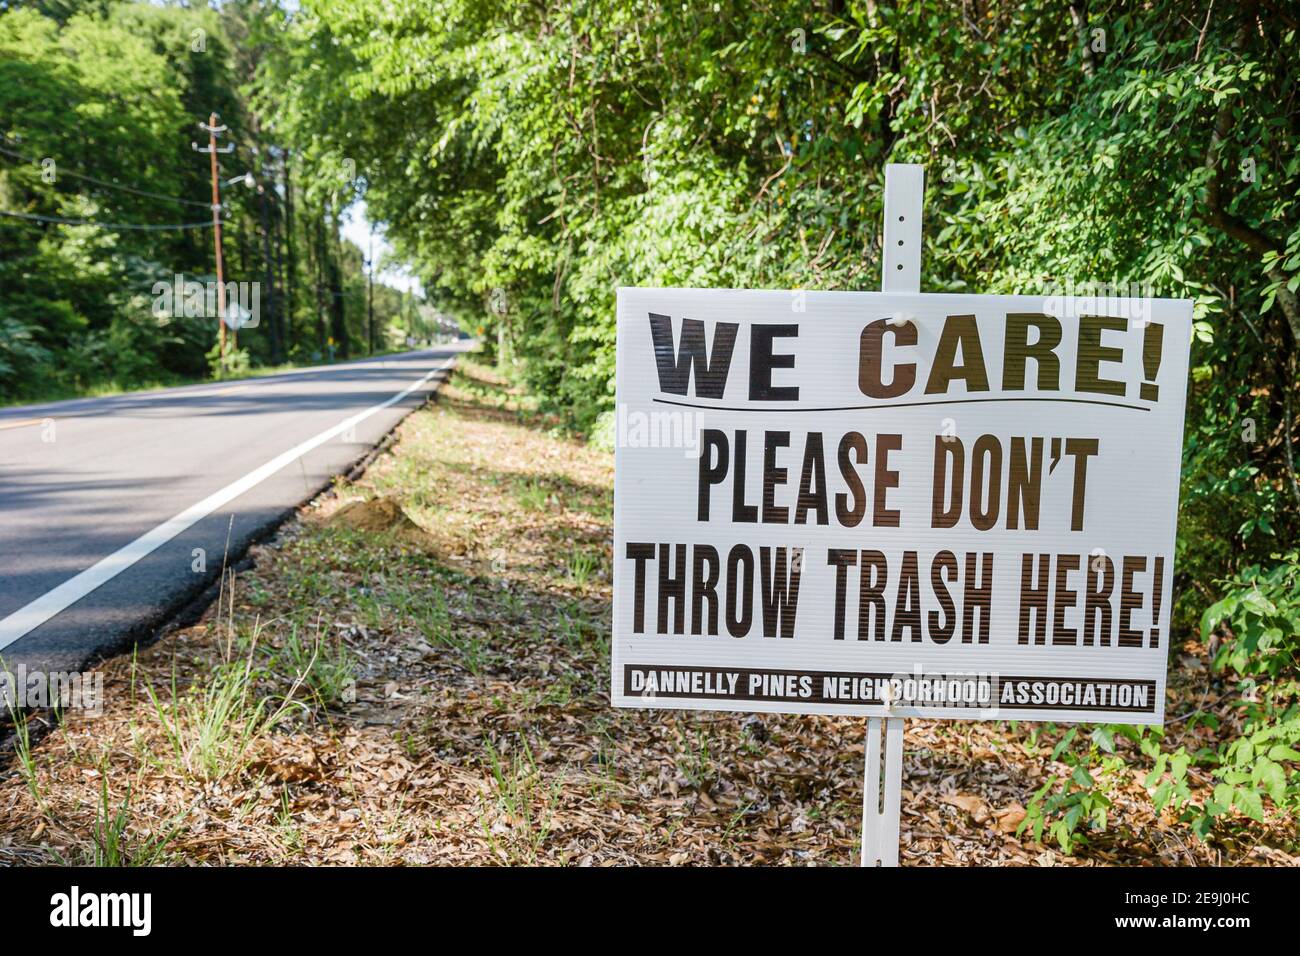 Alabama Montgomery Dannelly Pines sign please don't throw trash here,message, Stock Photo